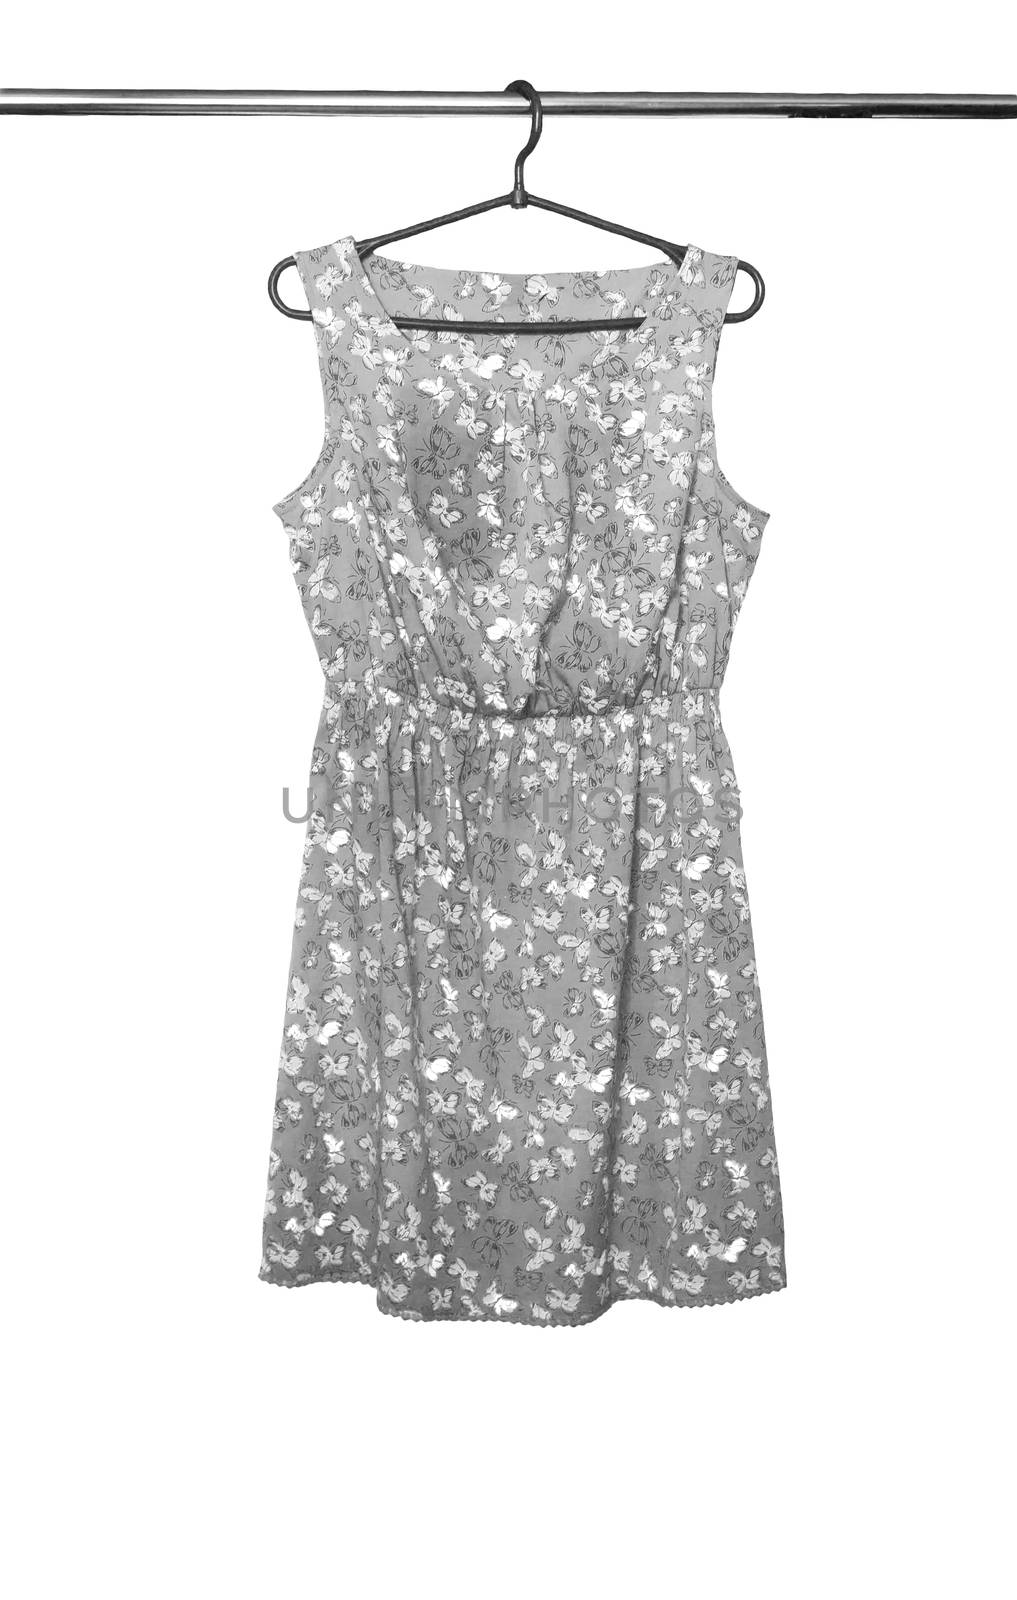 Summer dress with a butterfly pattern hanging on a hanger, isola by Tanacha